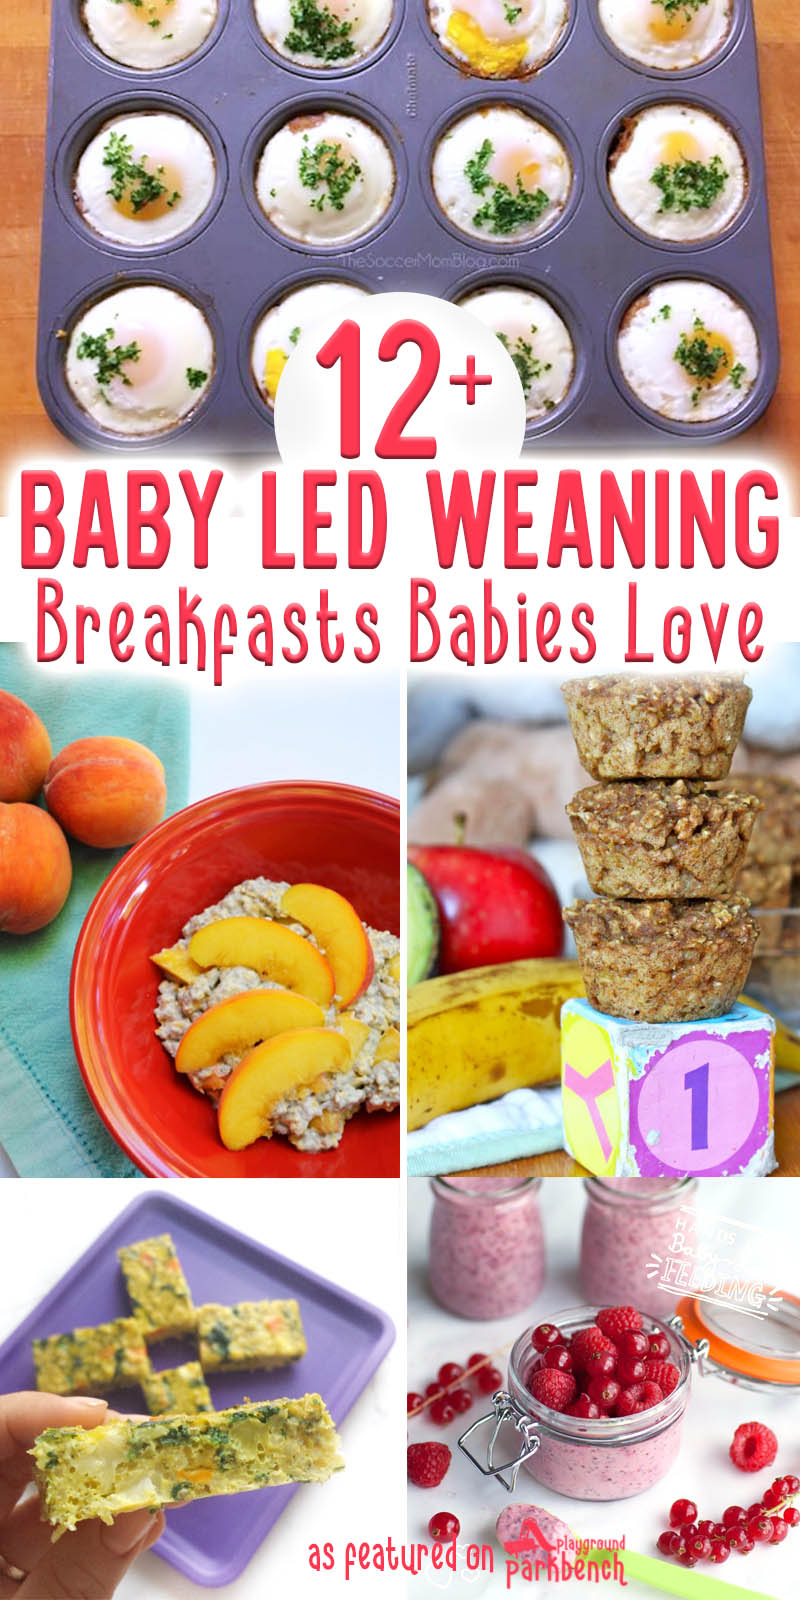 Start your baby on solid foods with real food! Here are 12+ baby led weaning breakfast ideas to get you started | #babyfood #blw #babyledweaning #recipes